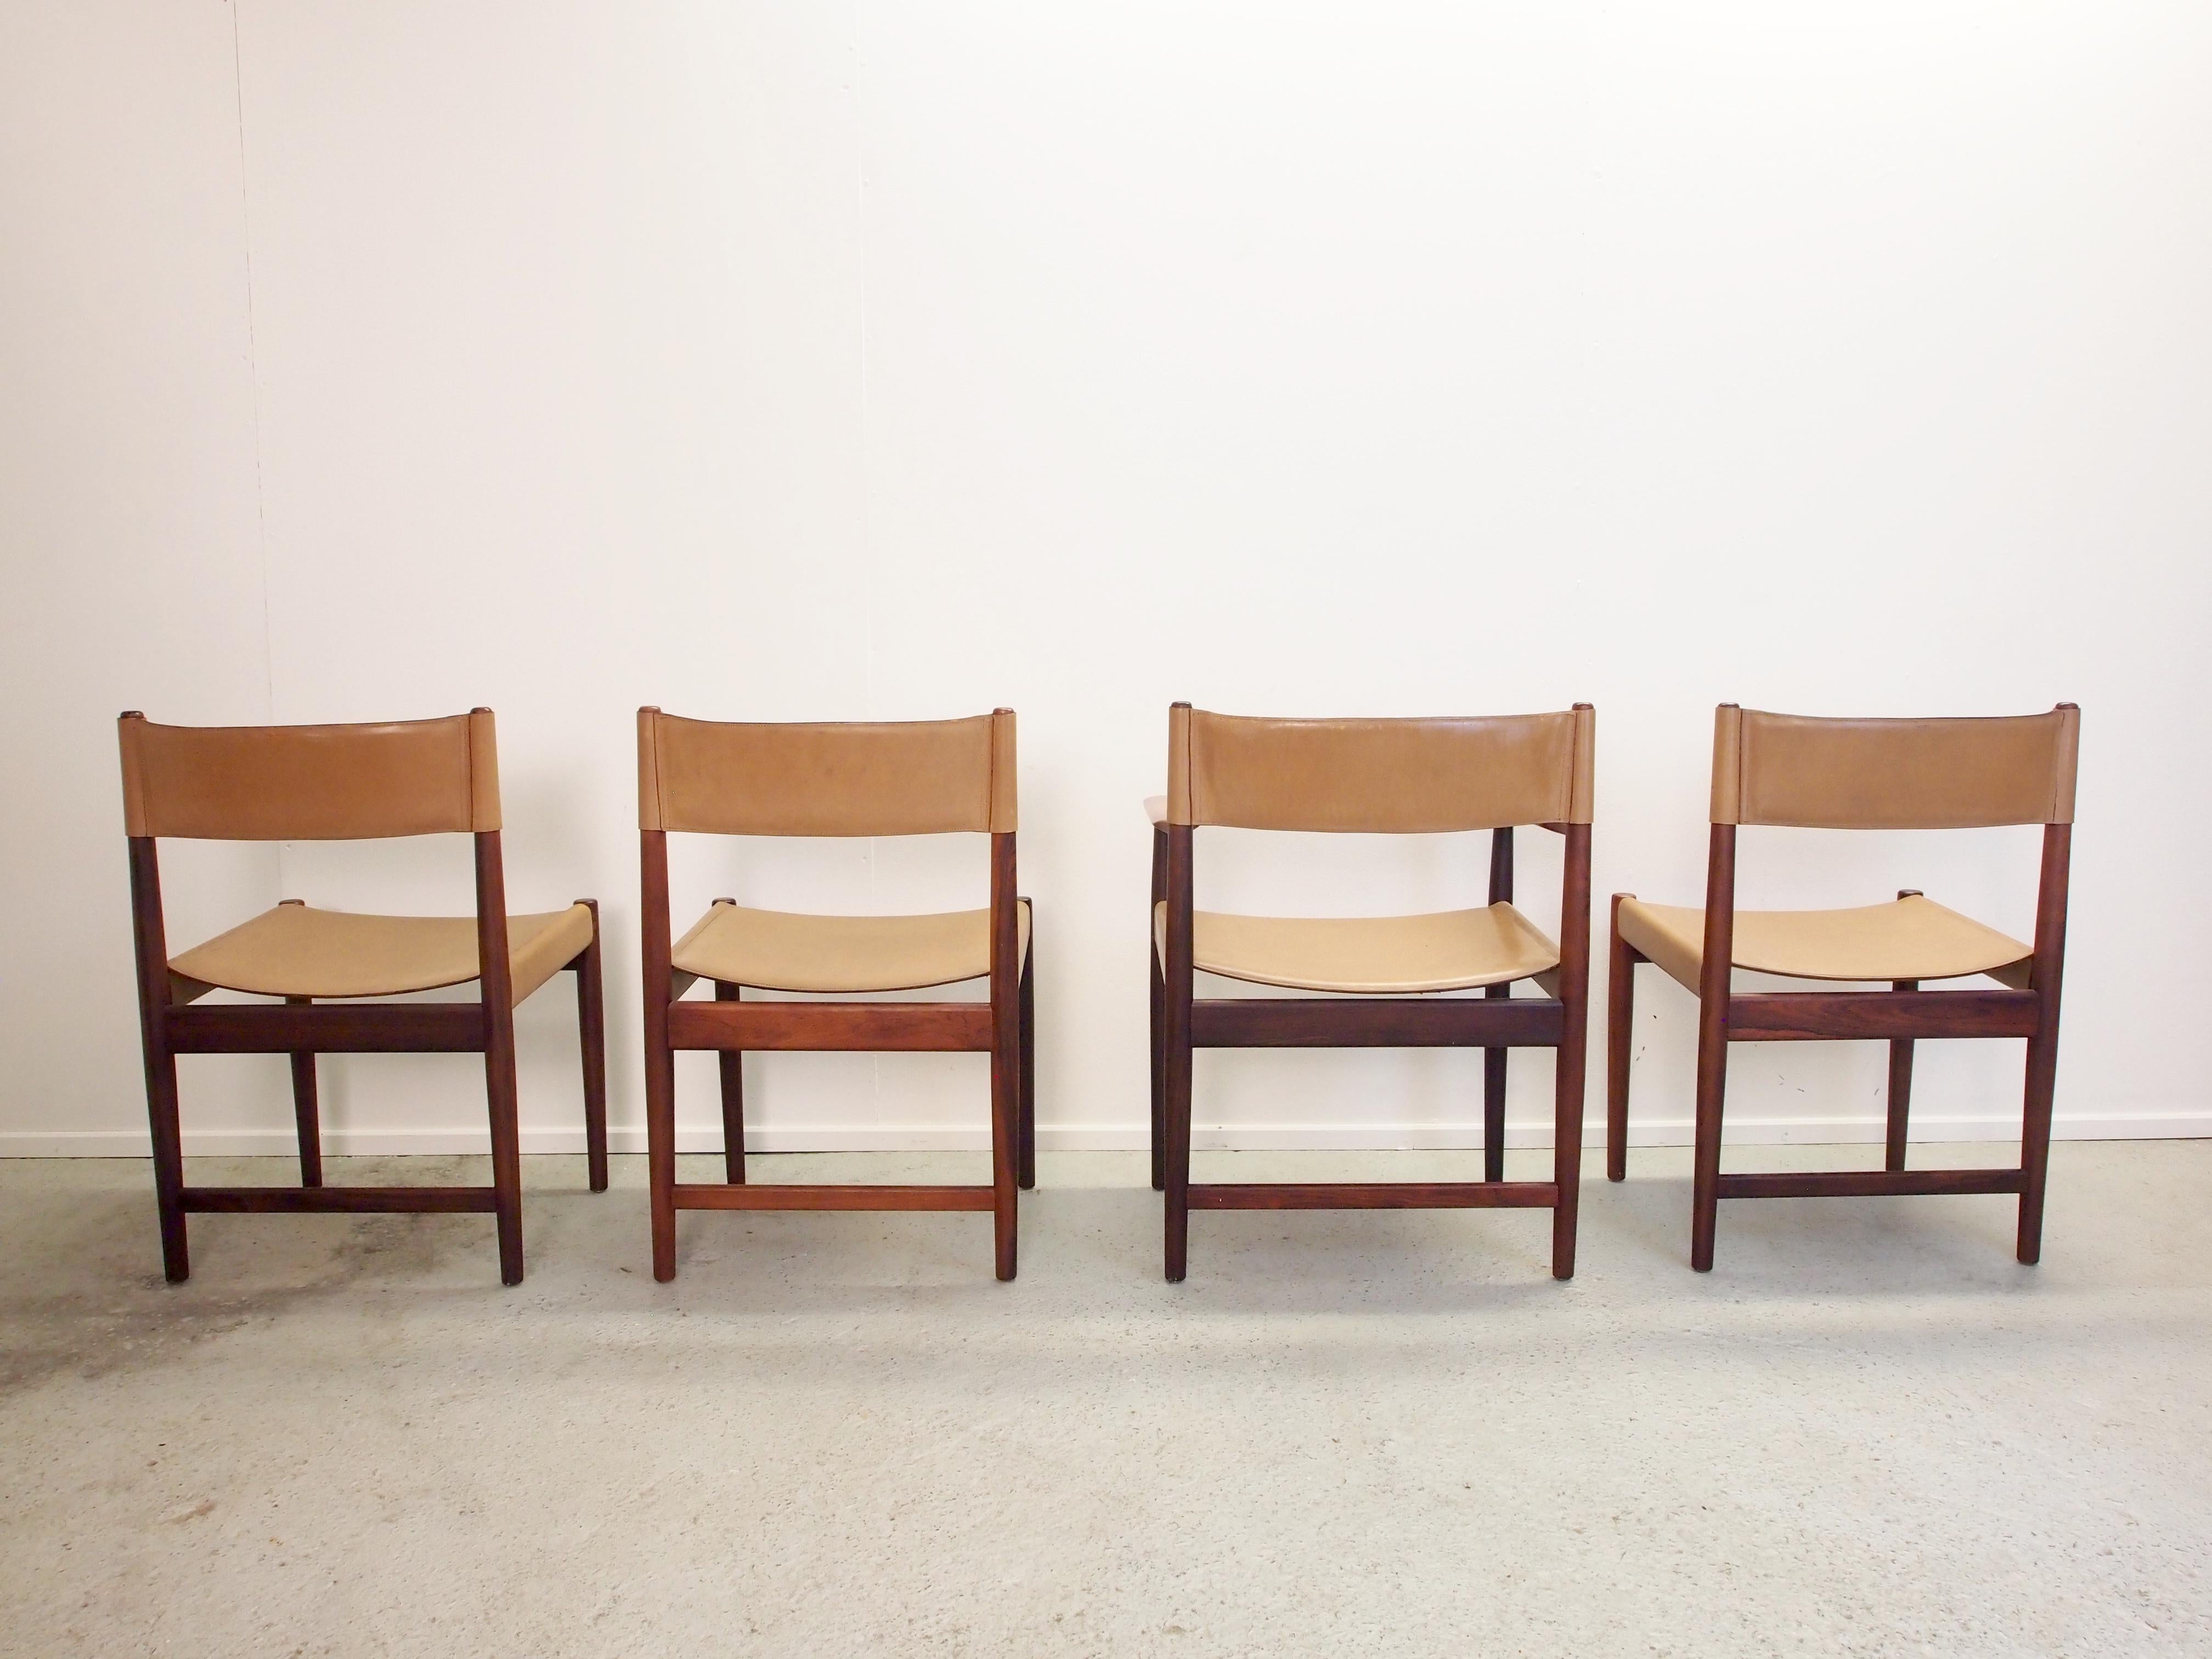 Stunning 4 vintage midcentury pallisander and leather dining chairs by Kurt Ostervig for Sibast Furniture.

4 beautiful high quality Danish design dining chairs from the 1950s with a solid palissander construction and liver colored leather